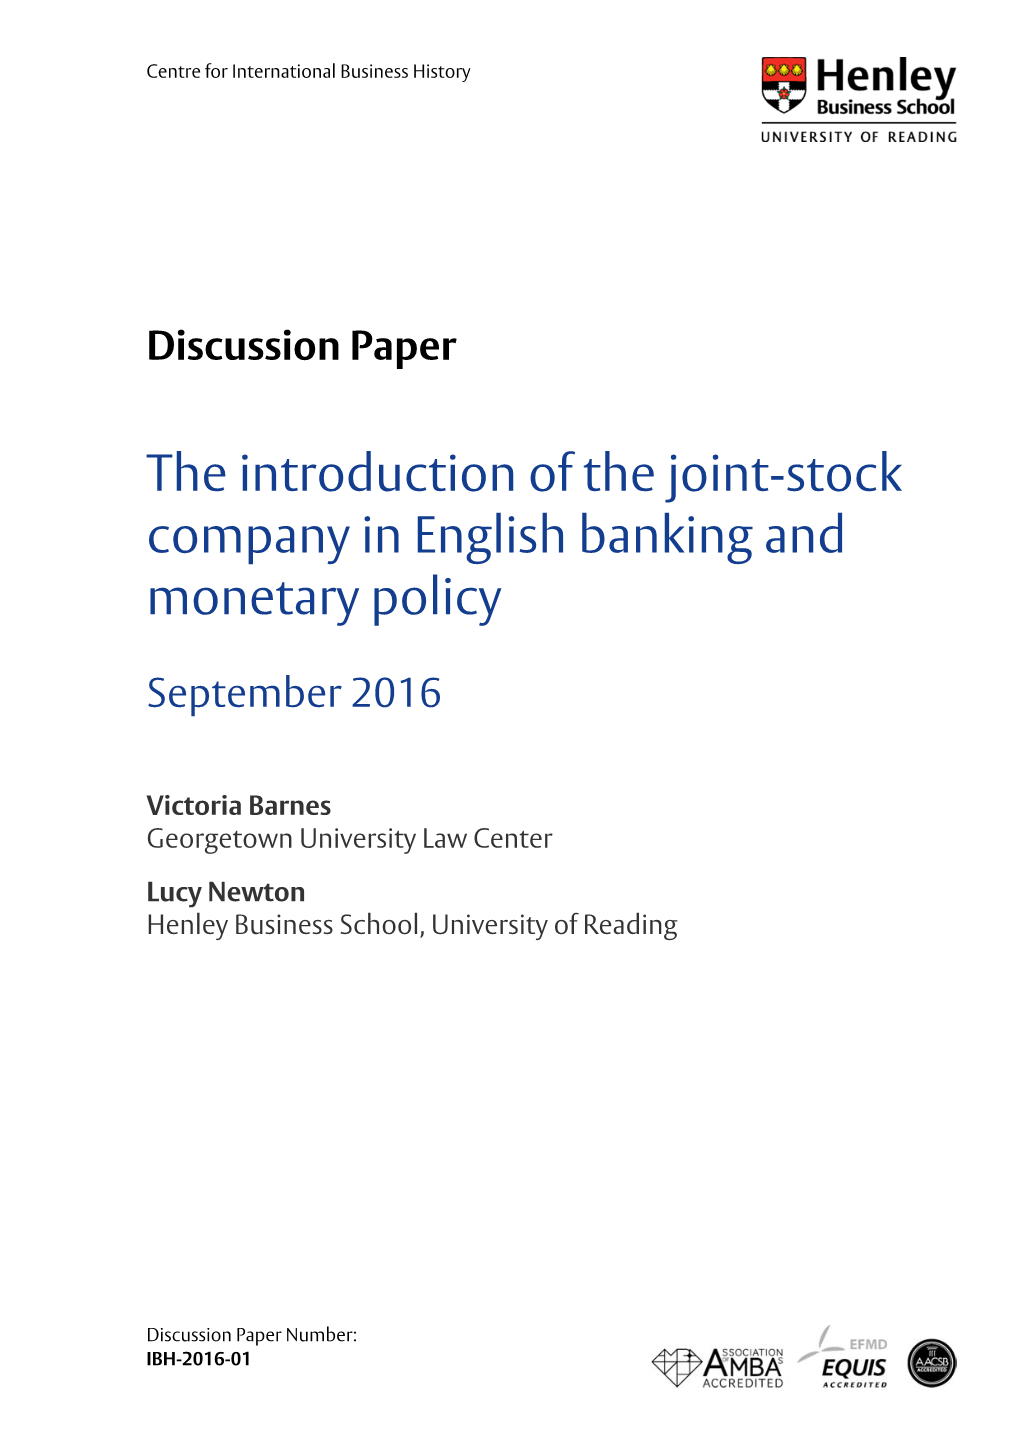 The Introduction of the Joint-Stock Company in English Banking and Monetary Policy